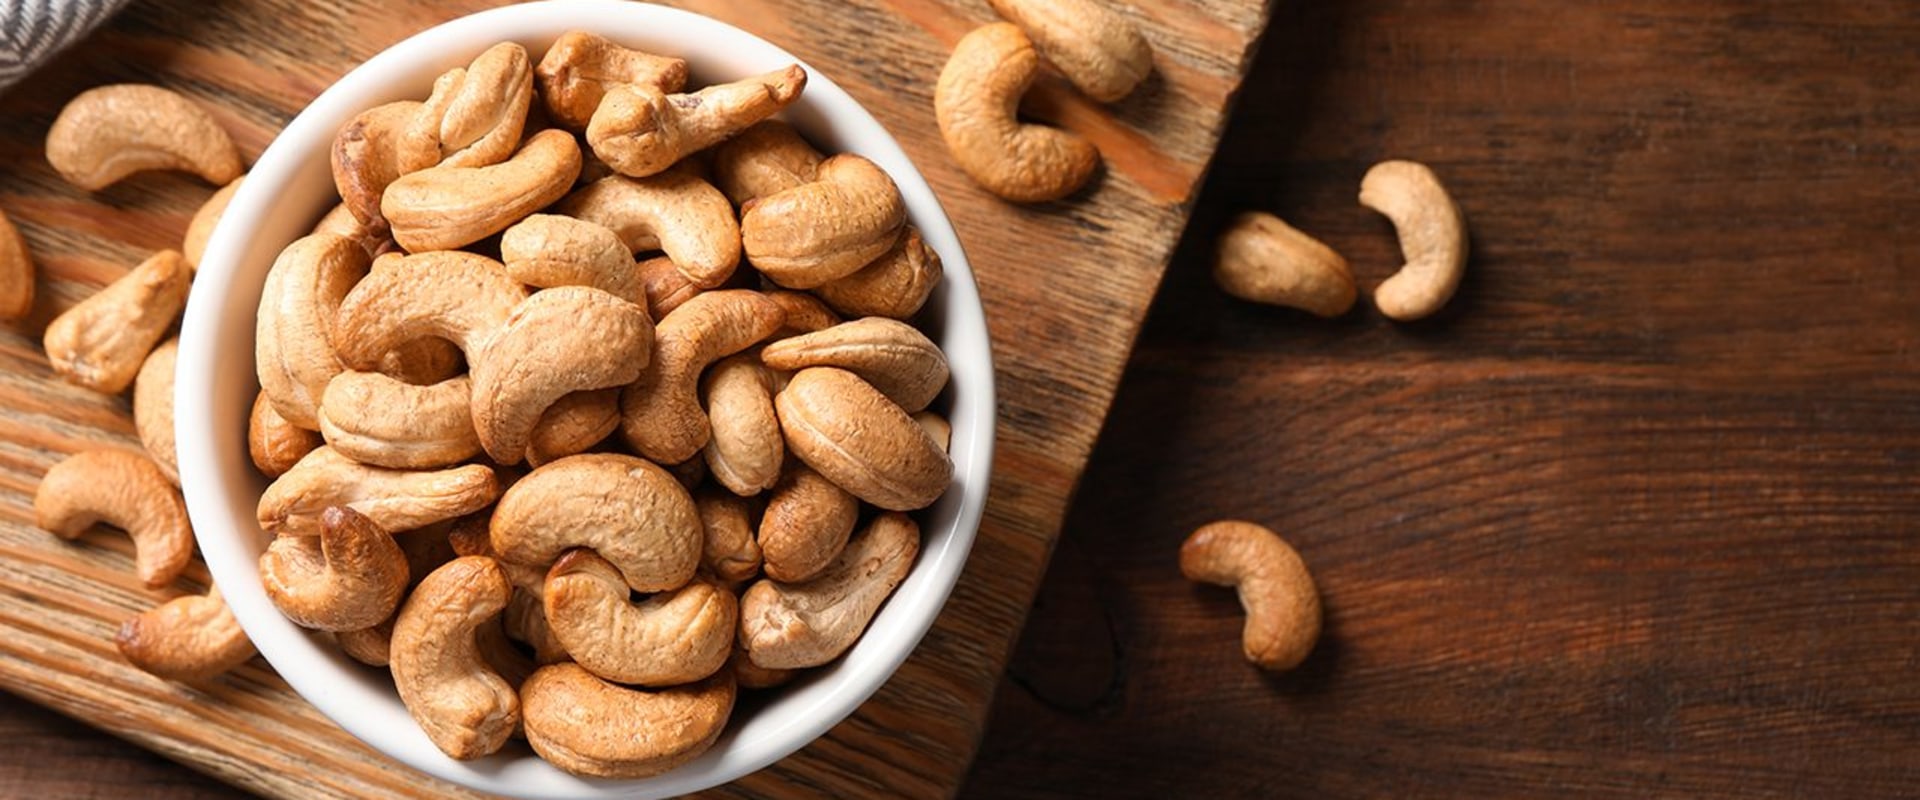 Why are cashews not good for you?